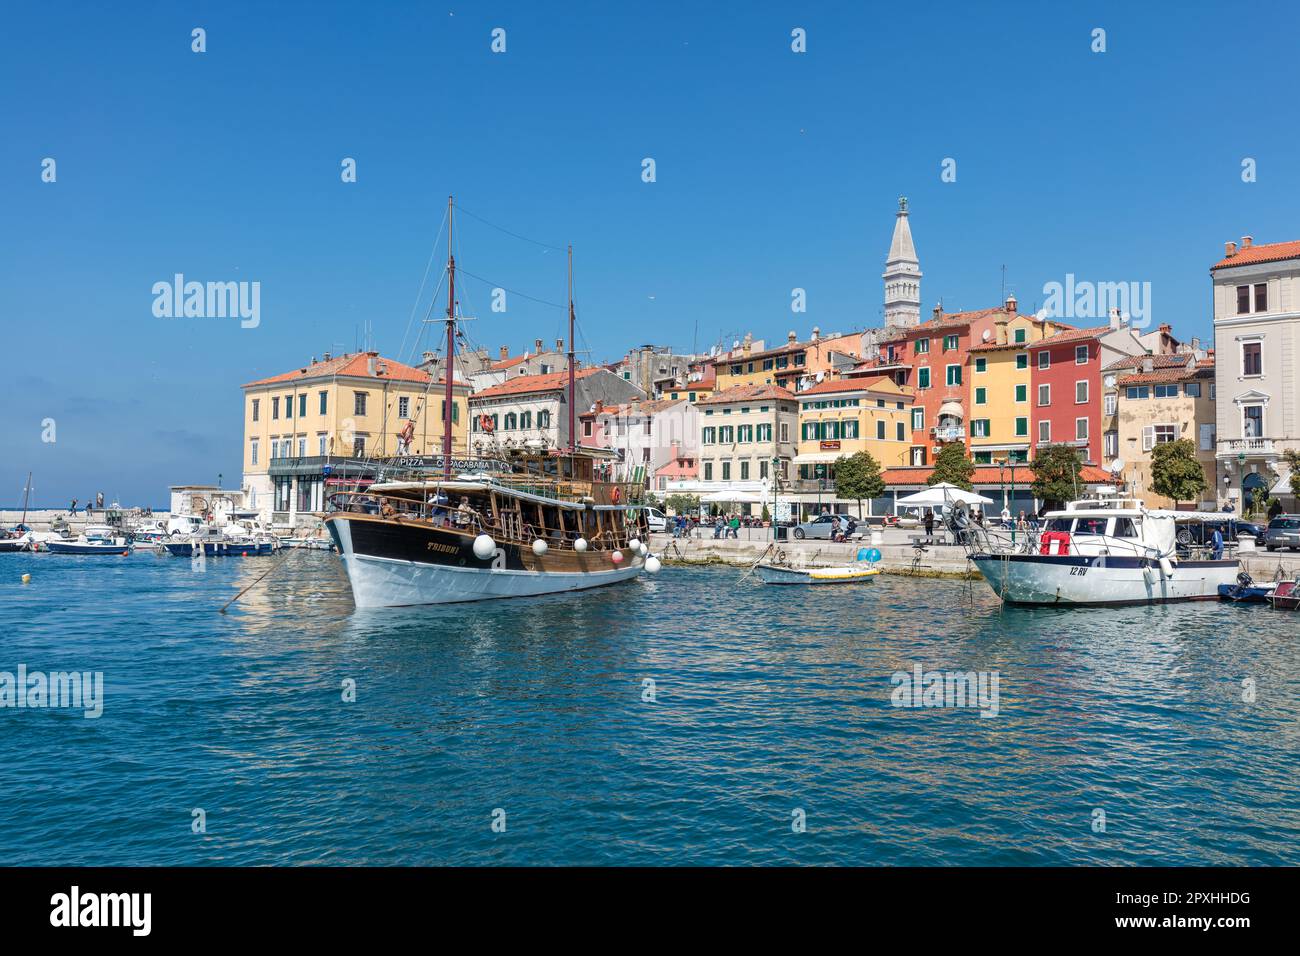 Boats moored in medieval Old Town harbour and marina in Adriatic Sea fishing port with historic  houses, shops, cafes, bars on Obala Pina Budicina Stock Photo